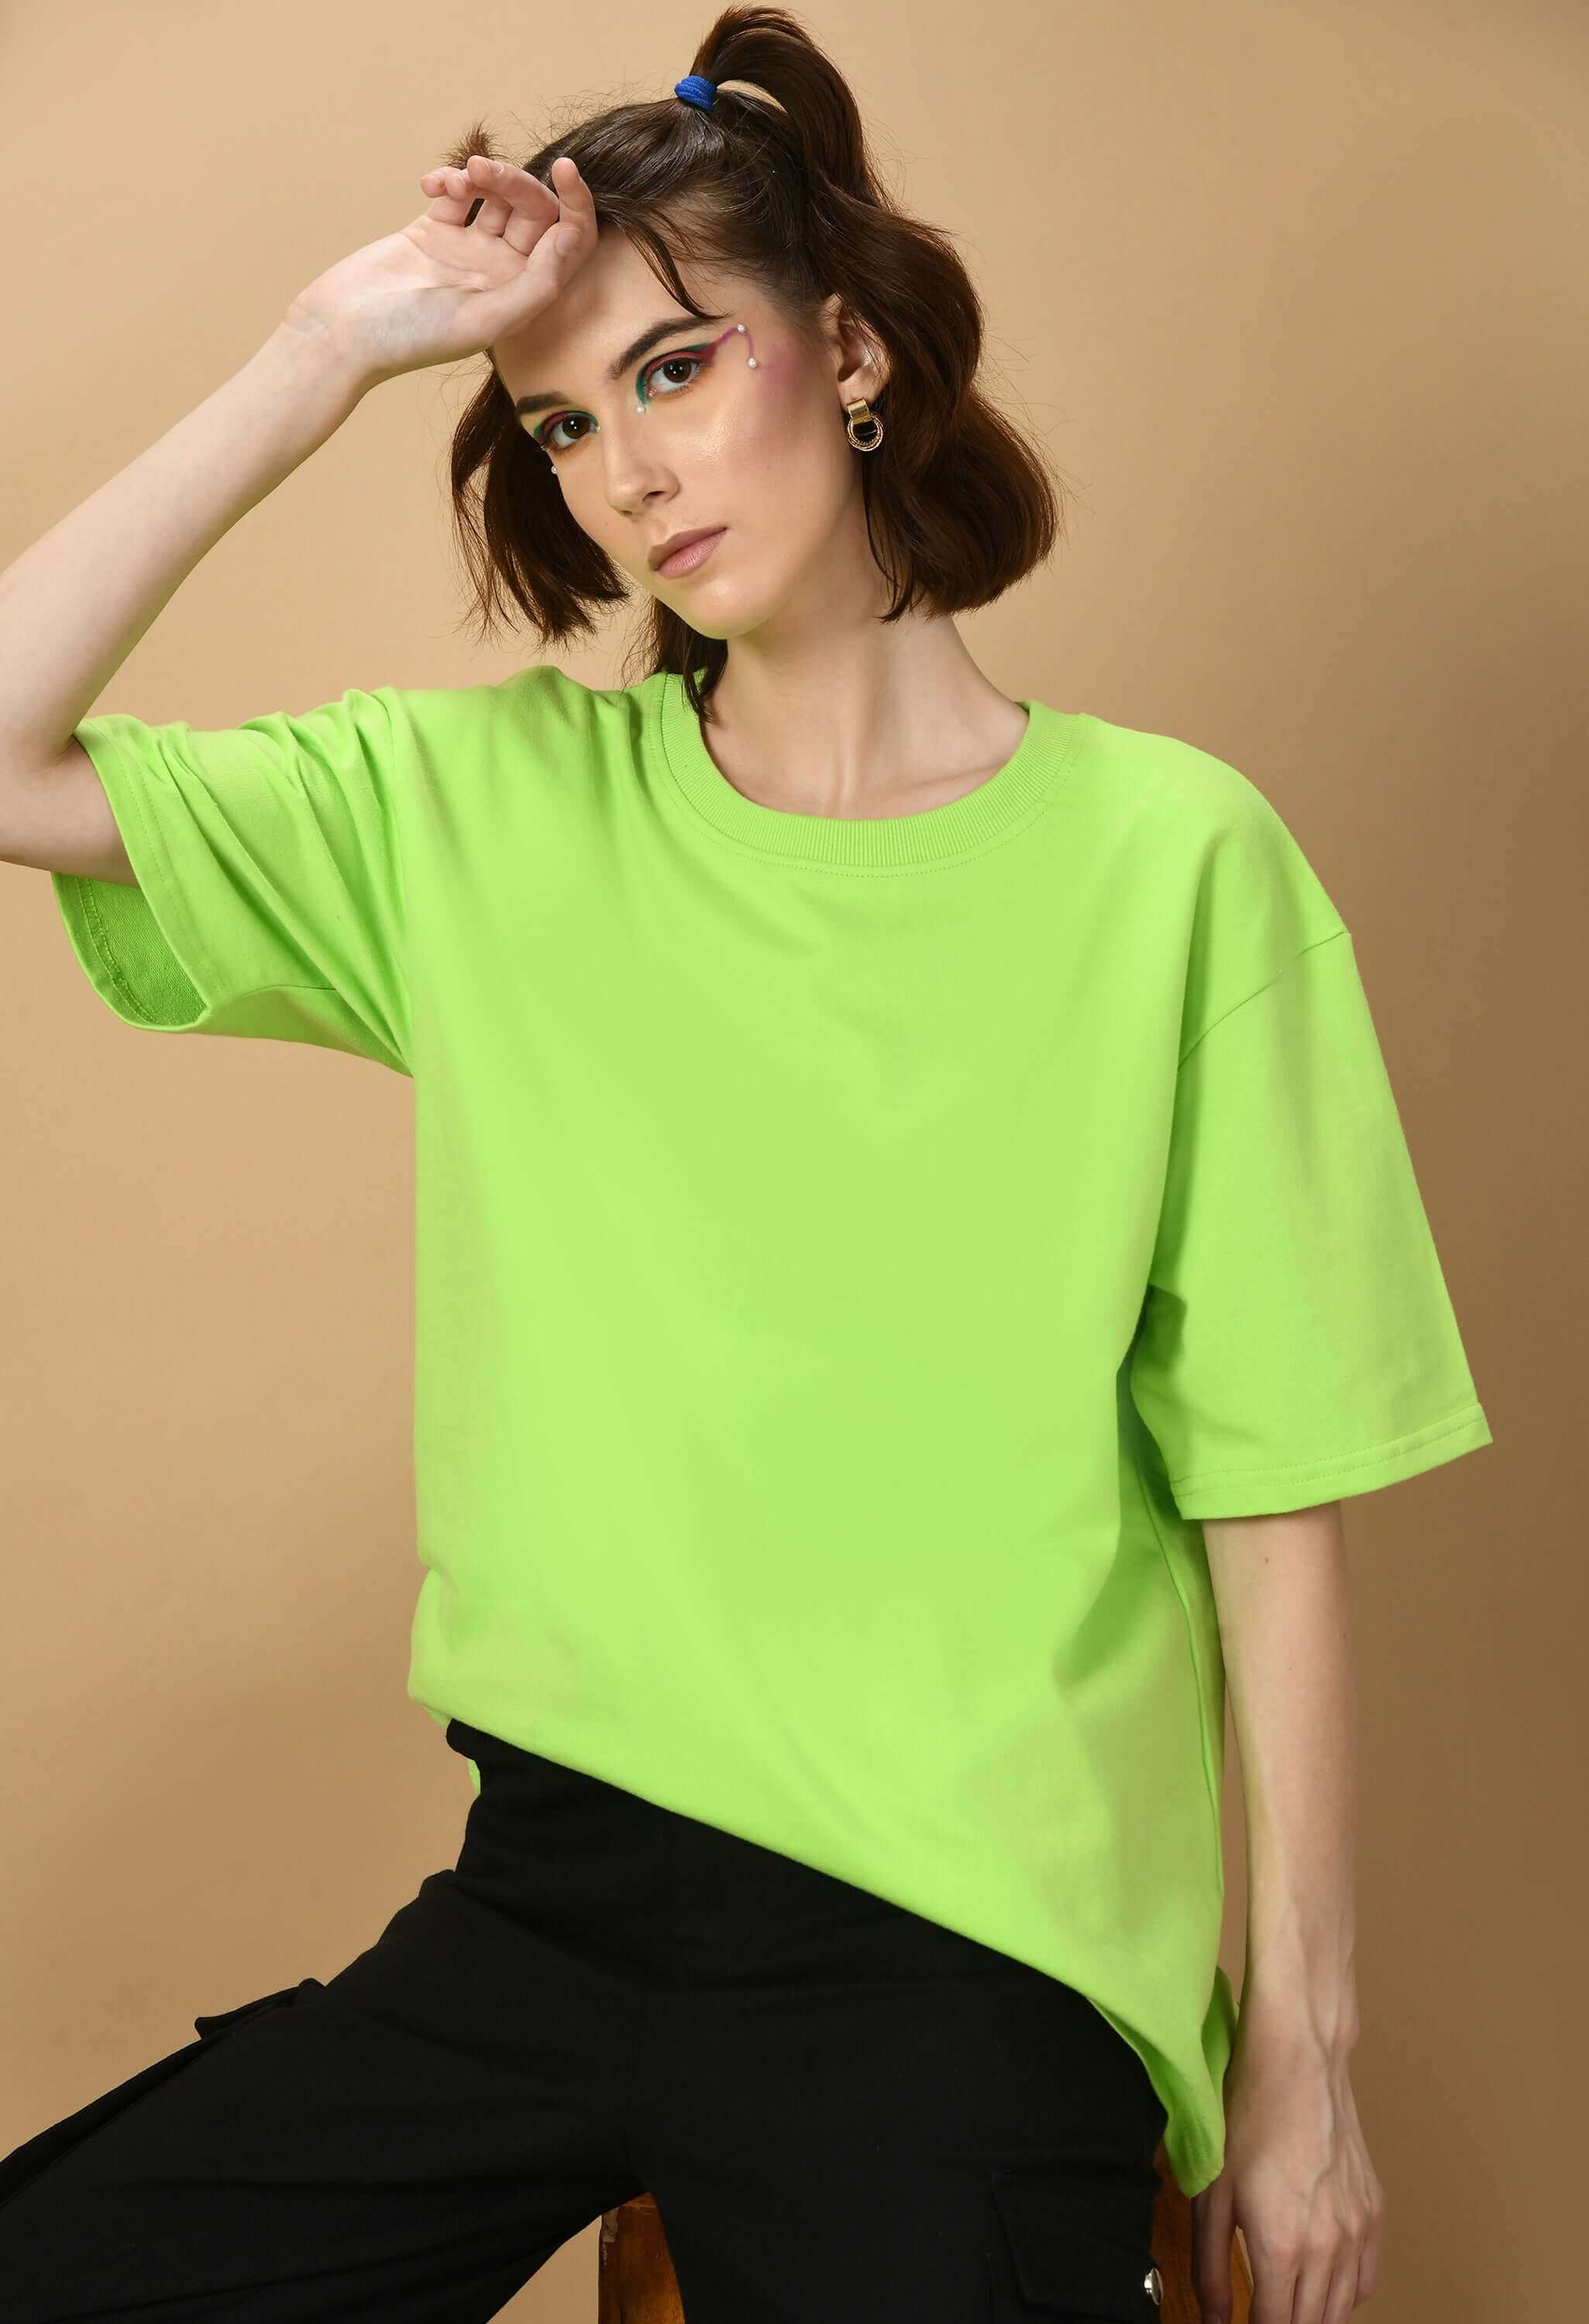 Neon color plain women's oversized t-shirt by offmint